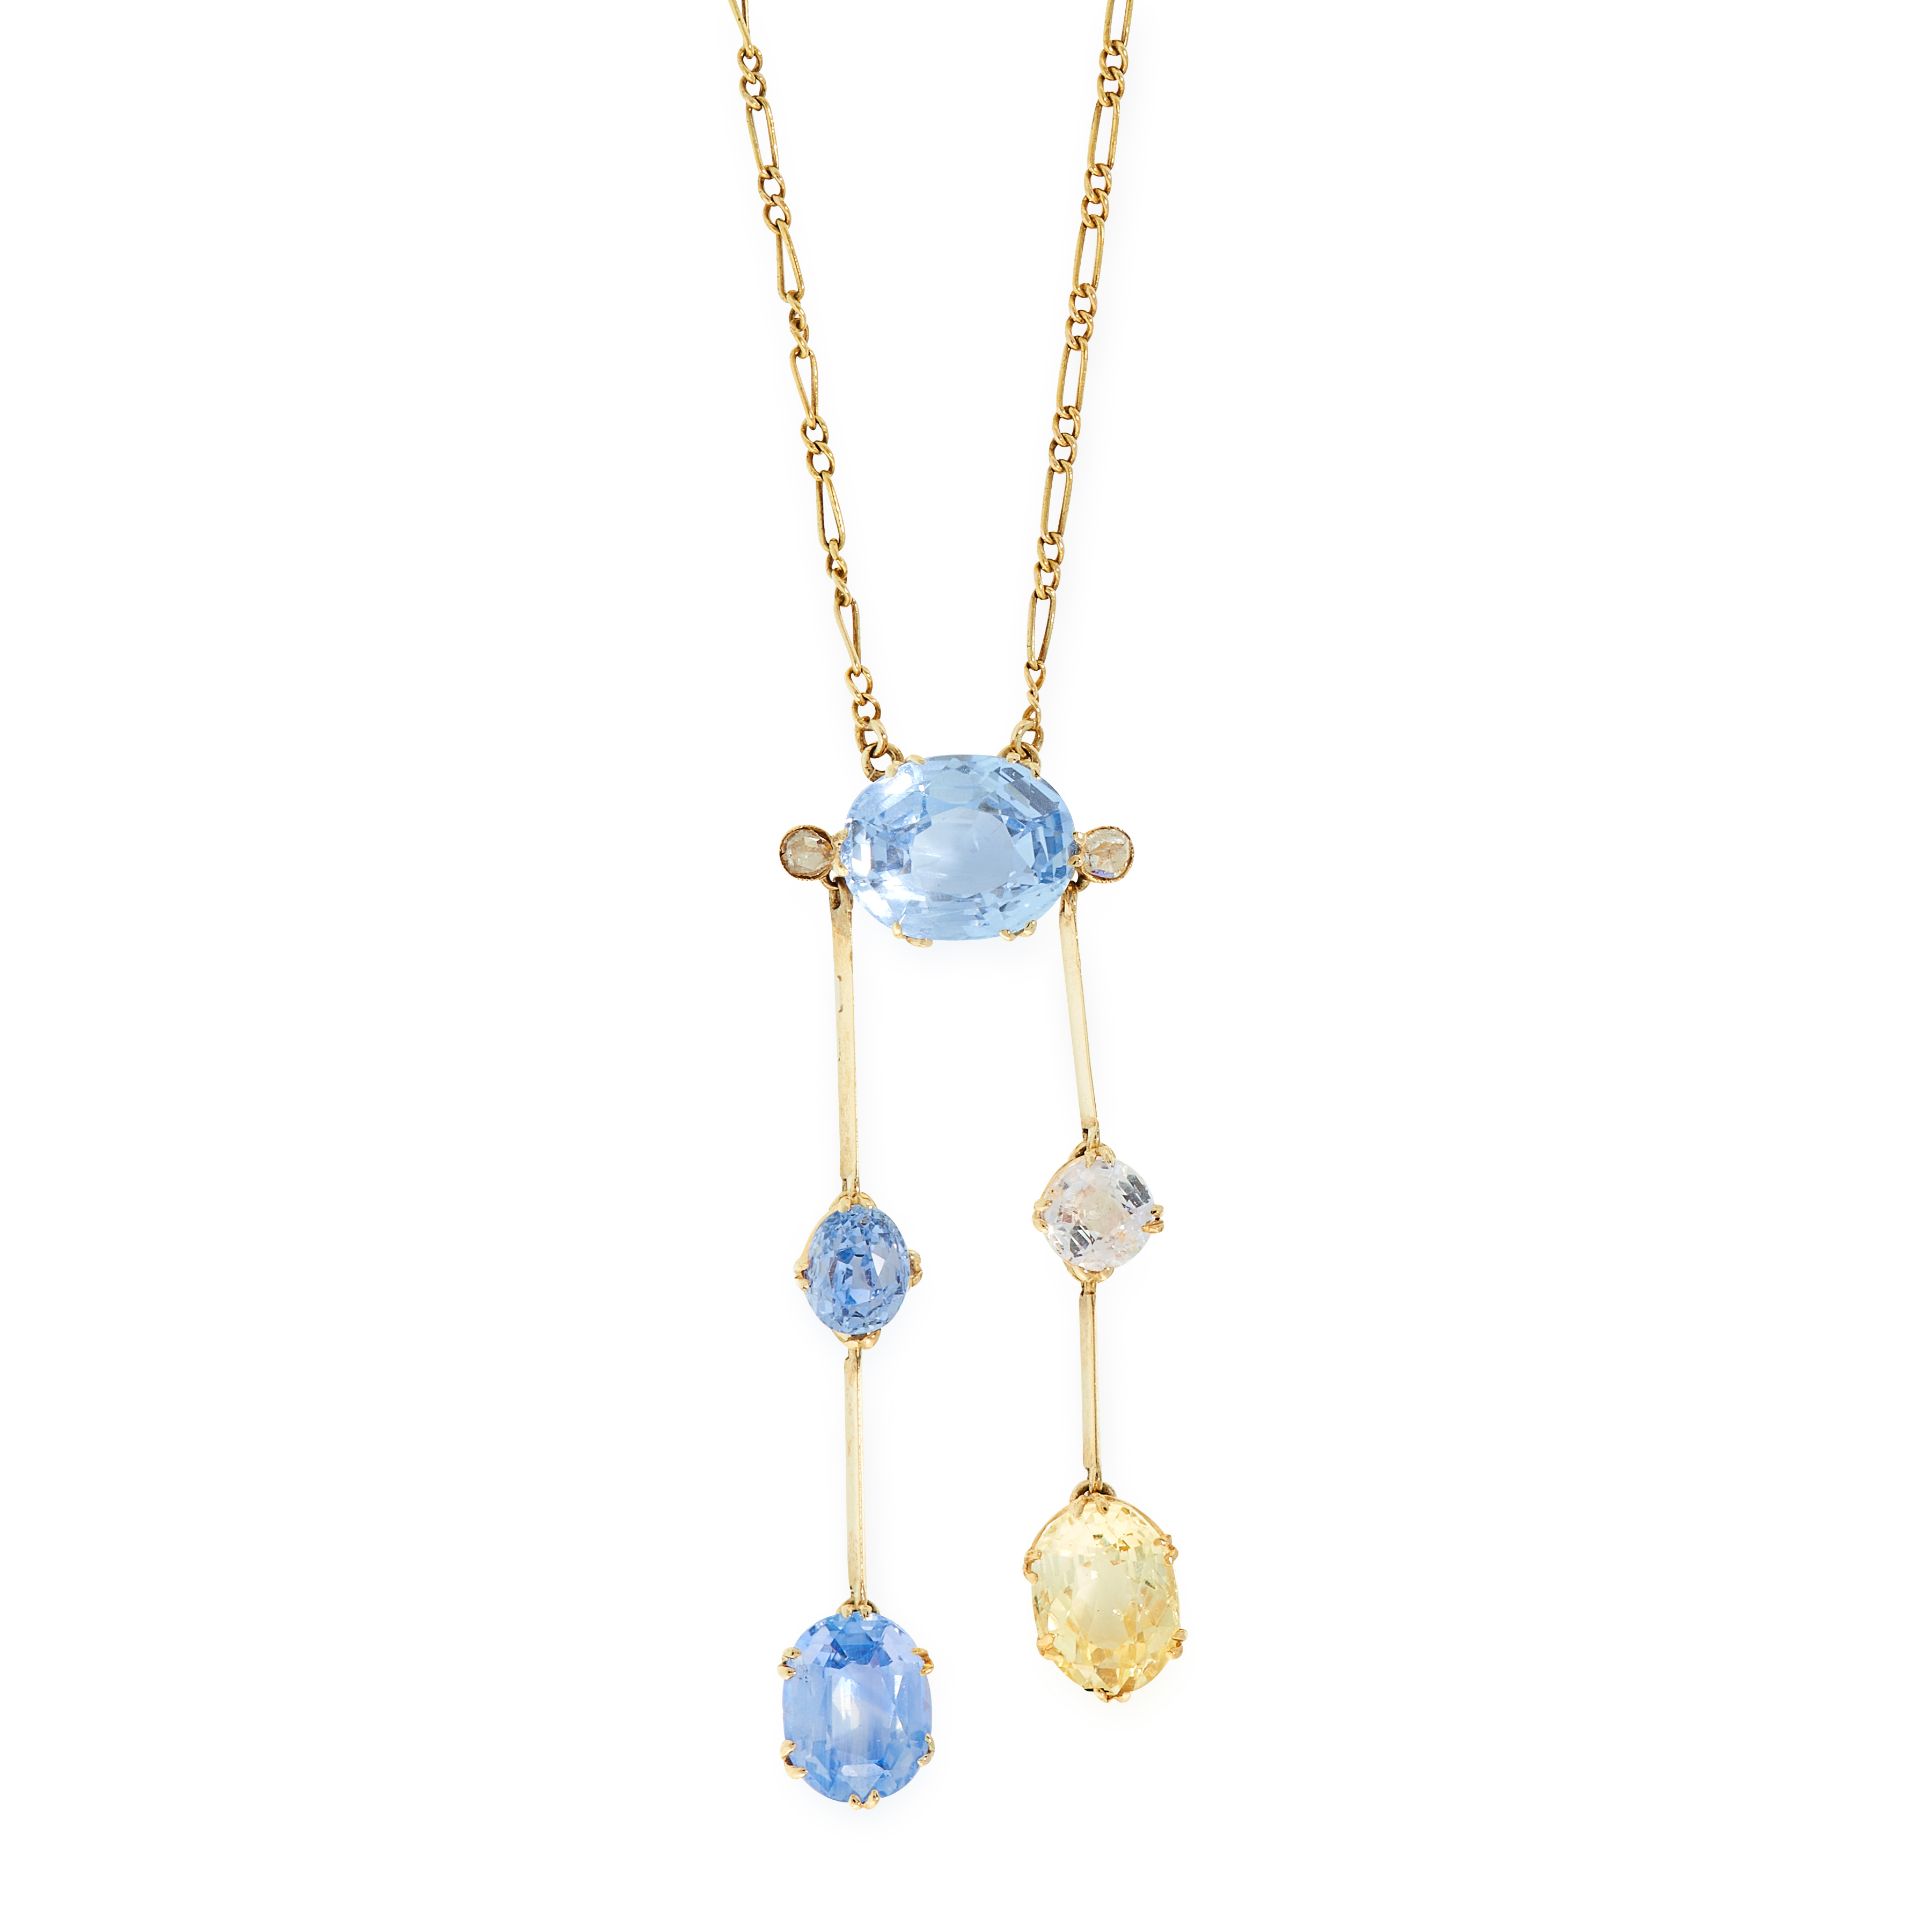 A CEYLON NO HEAT SAPPHIRE AND DIAMOND NEGLIGEE NECKLACE in yellow gold, set with a cushion cut